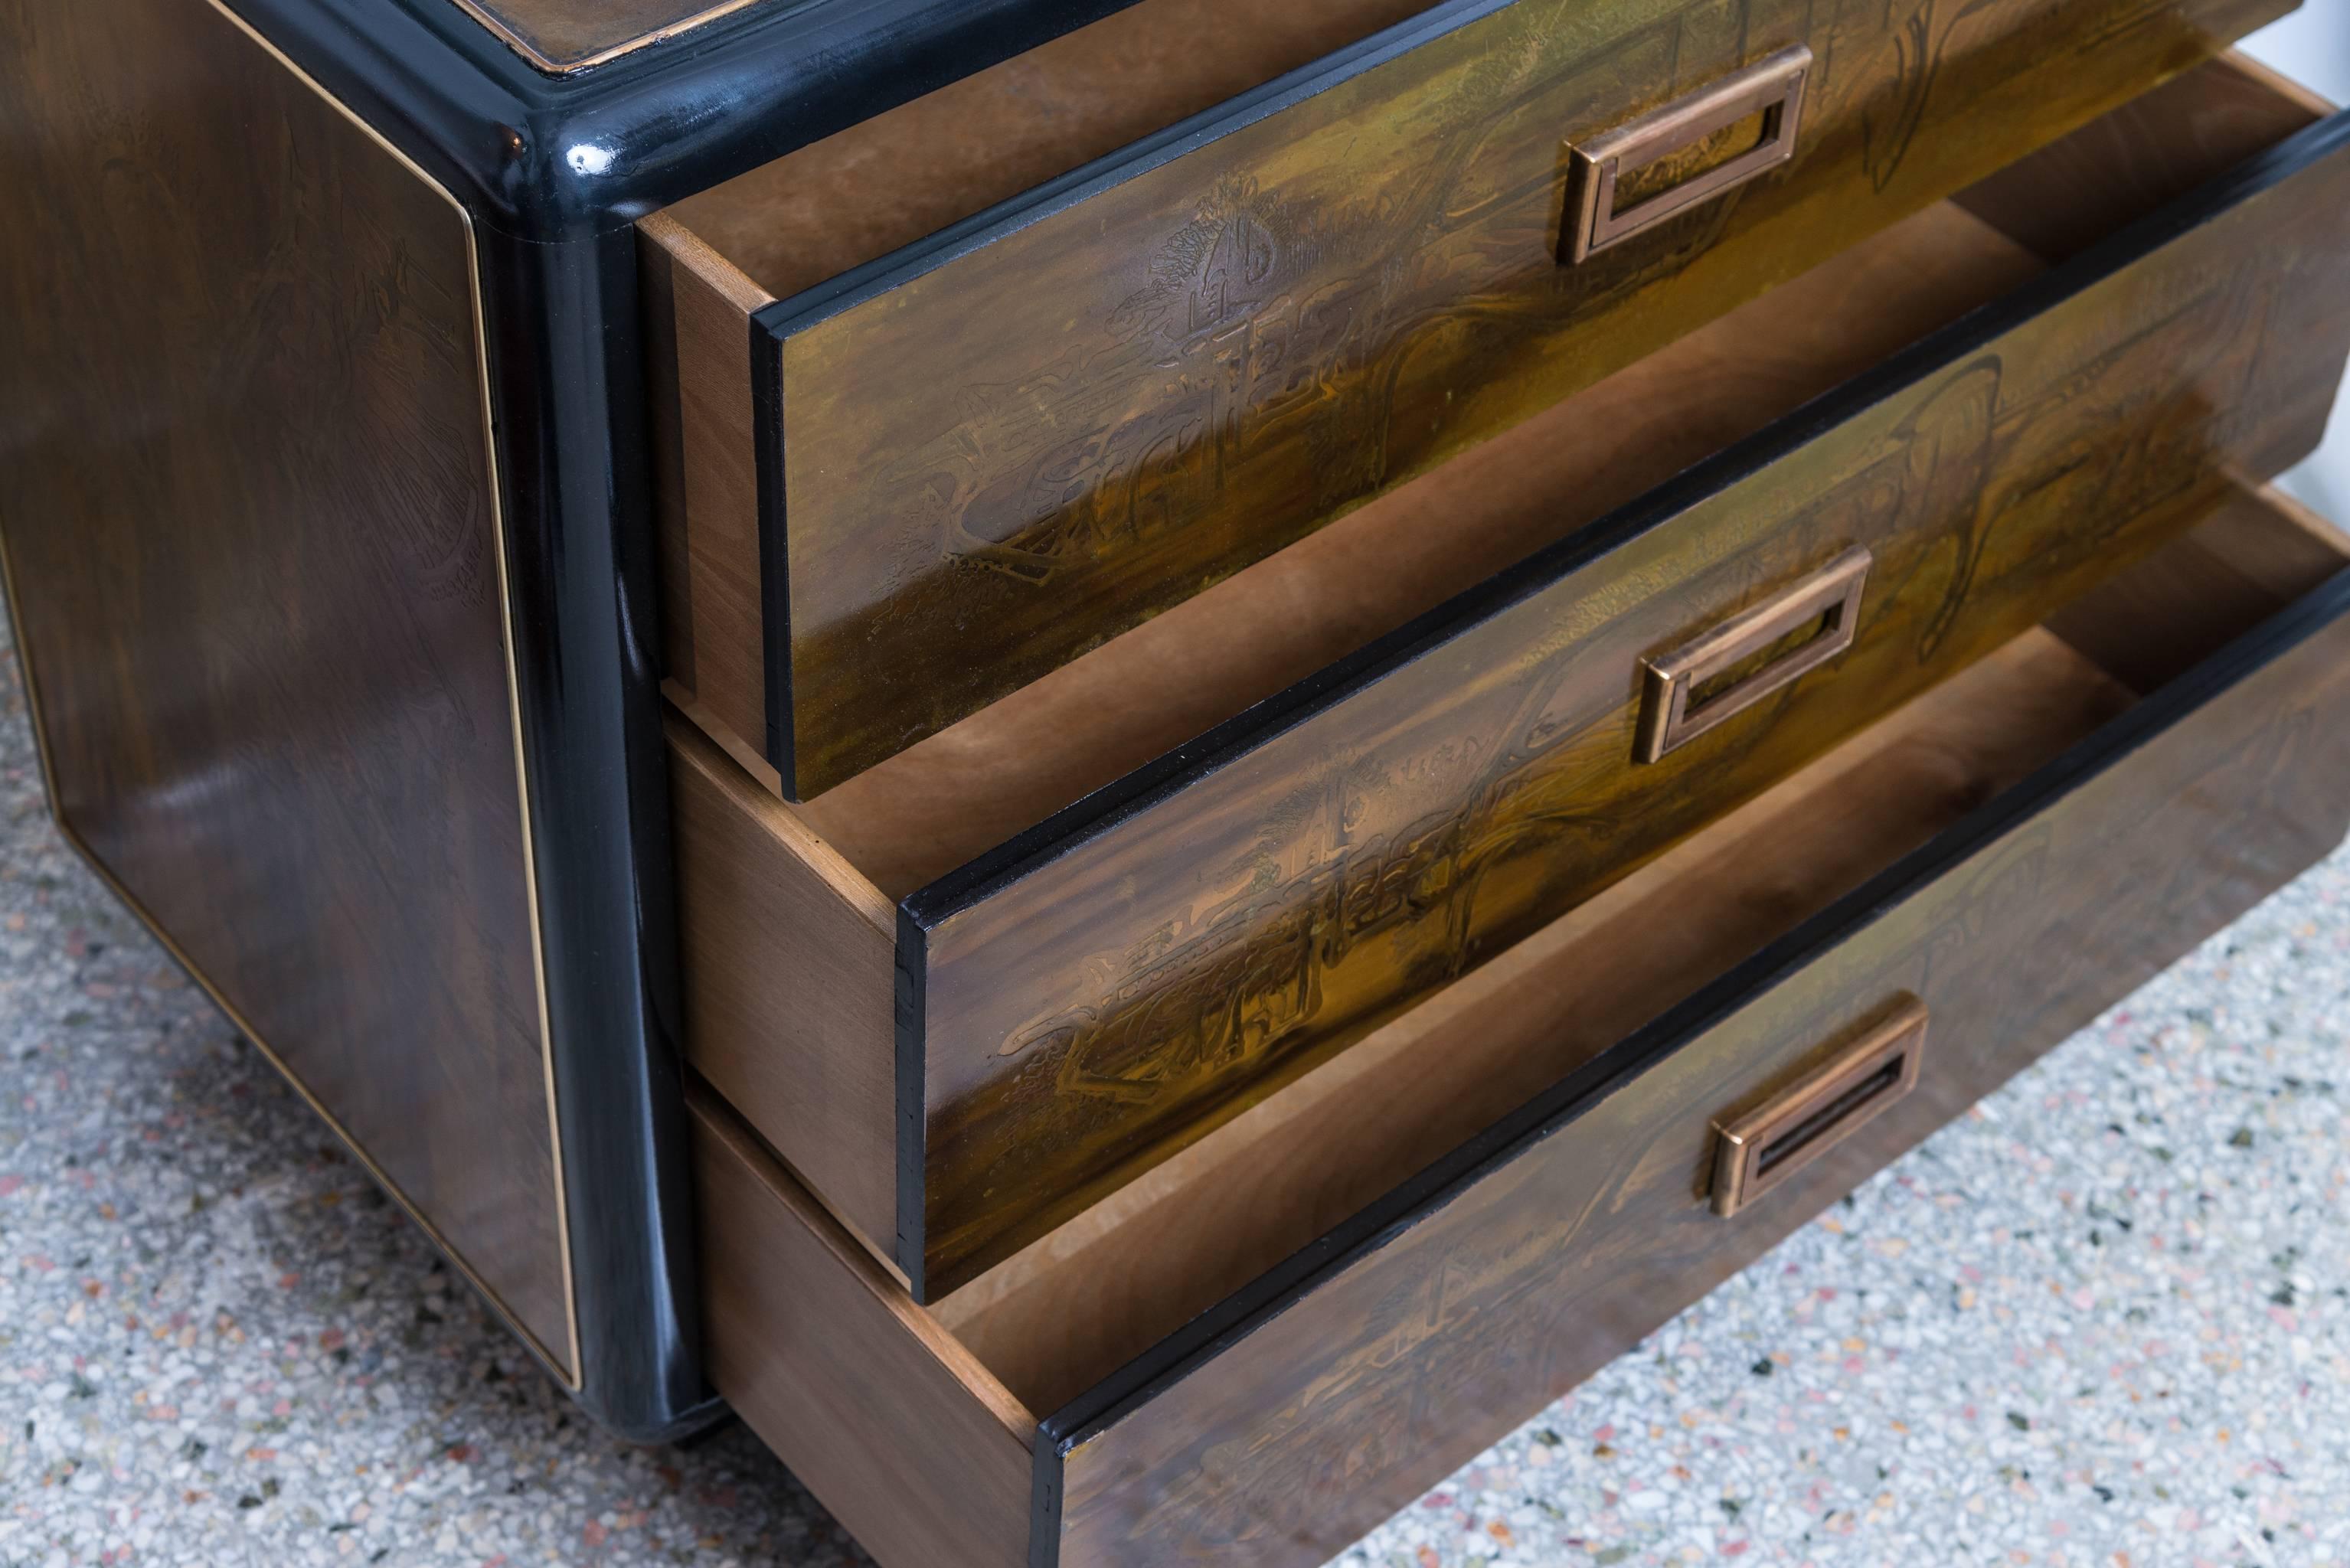 This pair of three-drawer bedside chest date from the 1970s and were manufactured by the American company Mastercraft.  Mastercraft was known for producing American modern, chic, glamorous and elegant furniture. 

This piece was designed by the